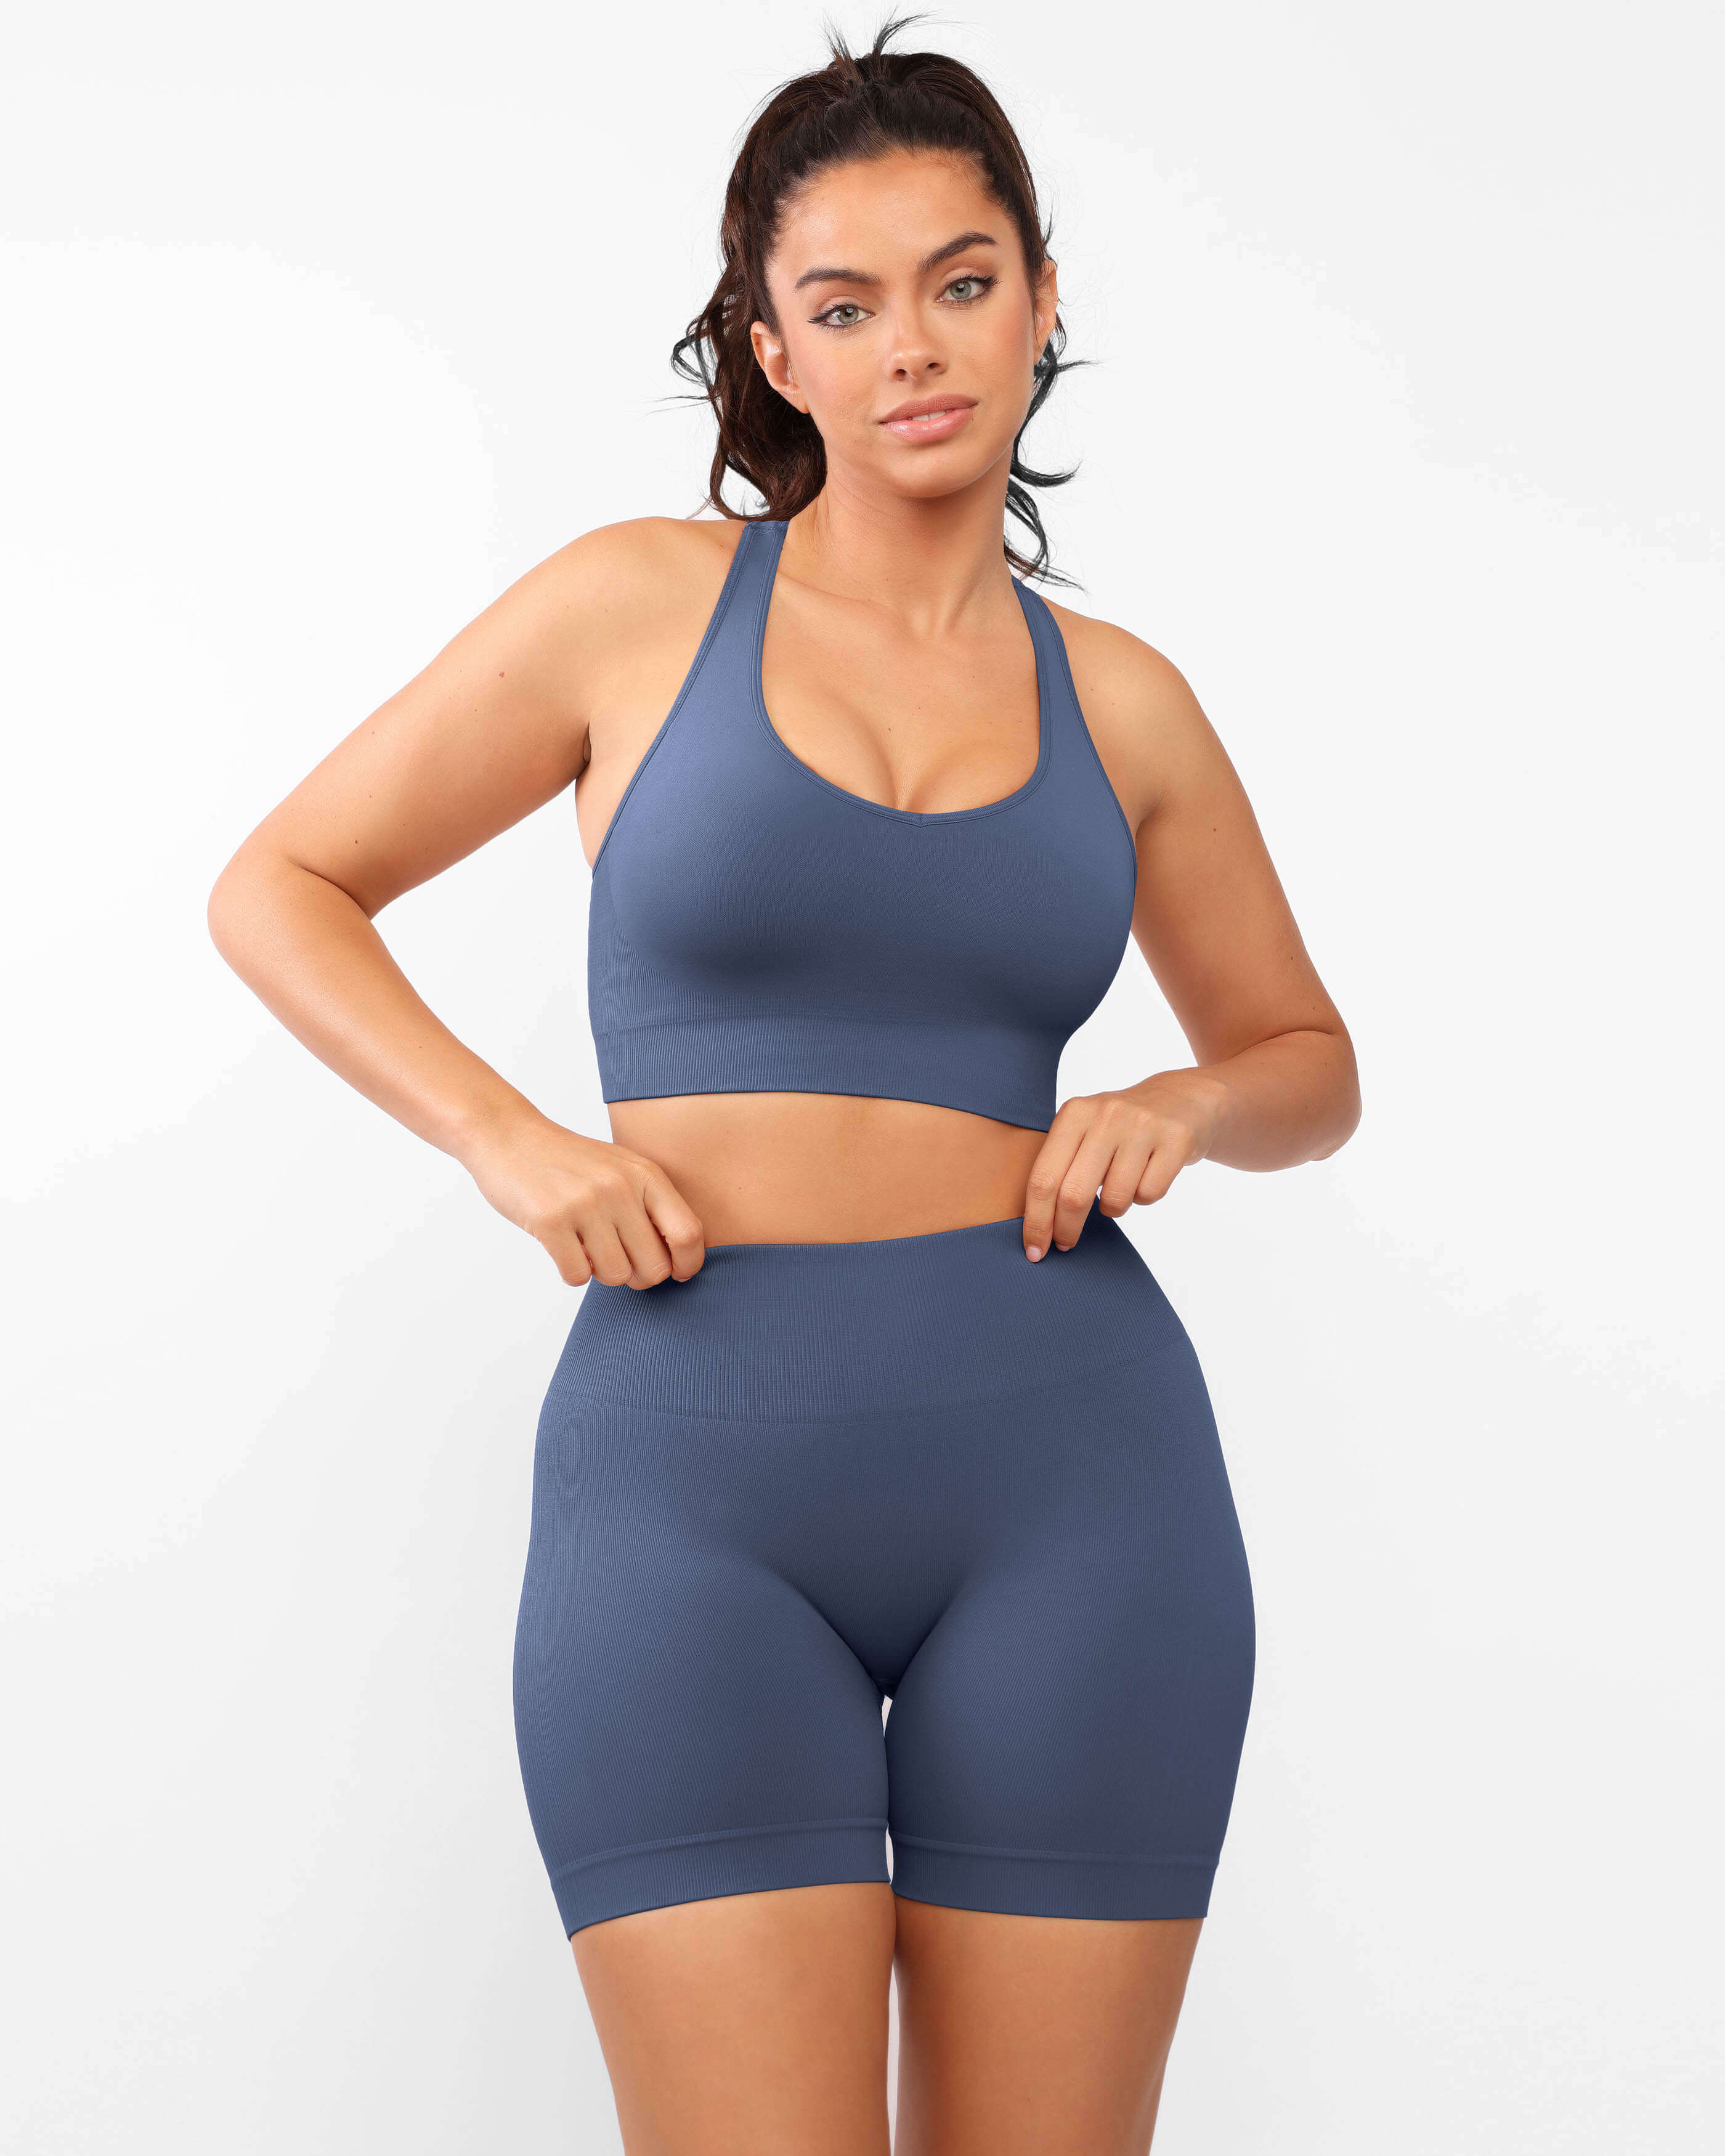 Womens Active Fitness Top With Falsies, Yoga Bra Pad, And Long Sleeves For  Workout, Training, Gym, Yoga, Running, Hiking Size 13 From Hollywany,  $17.66